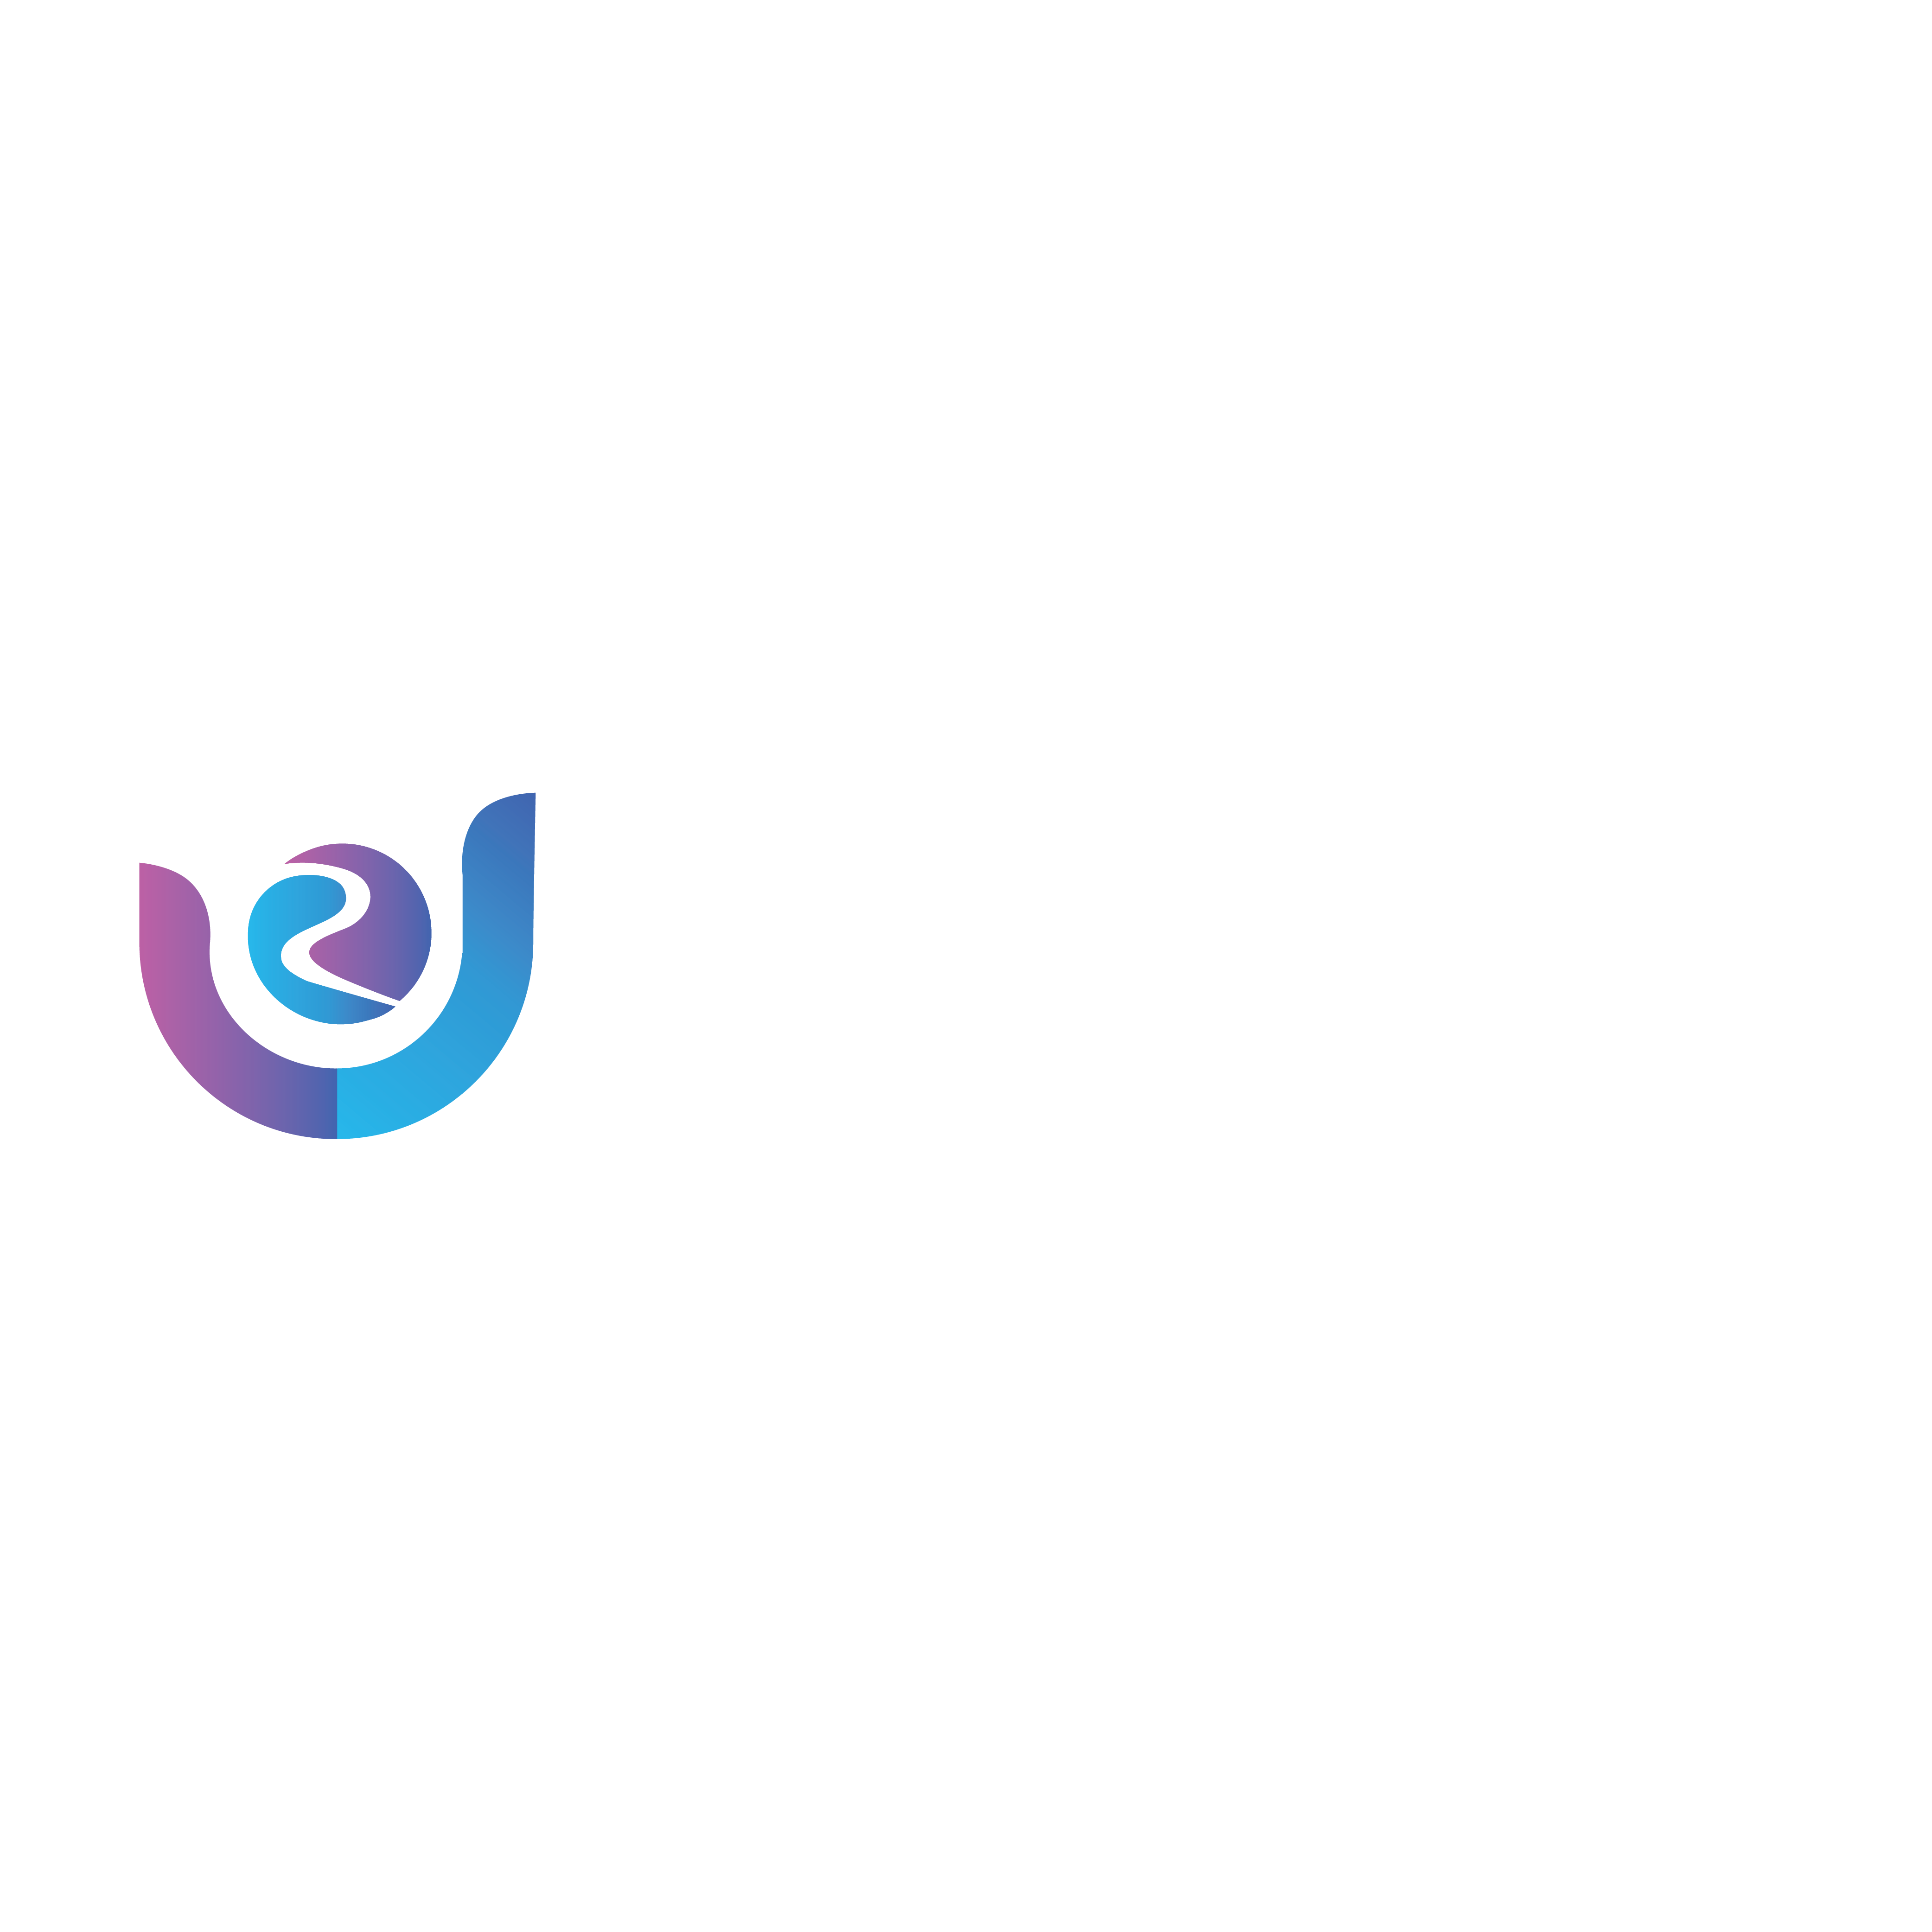 Welcome Rebel Official